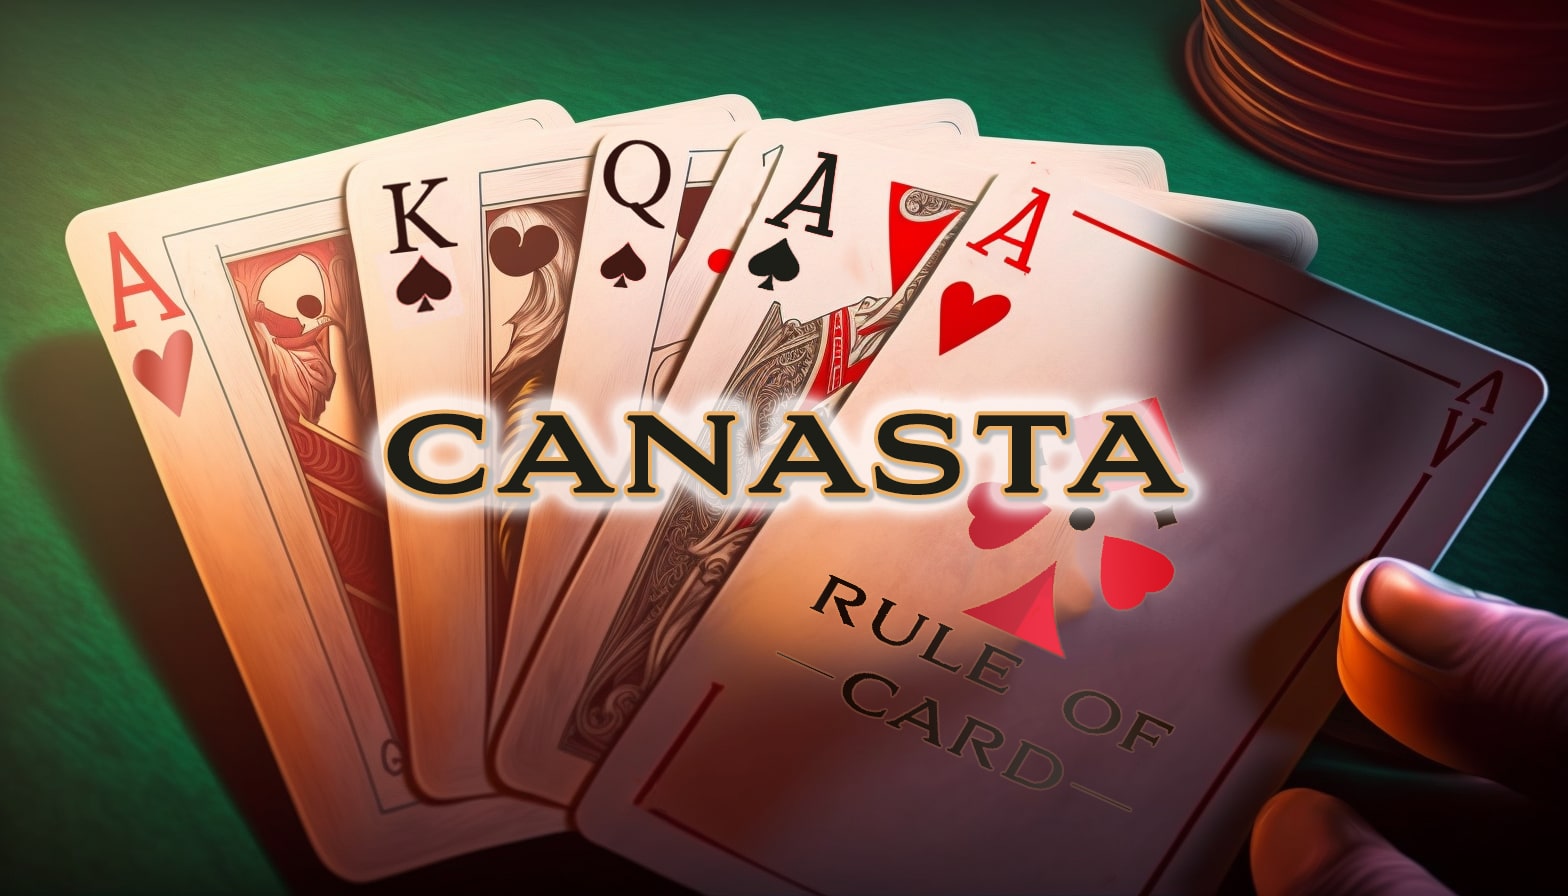 Playing the card game Canasta